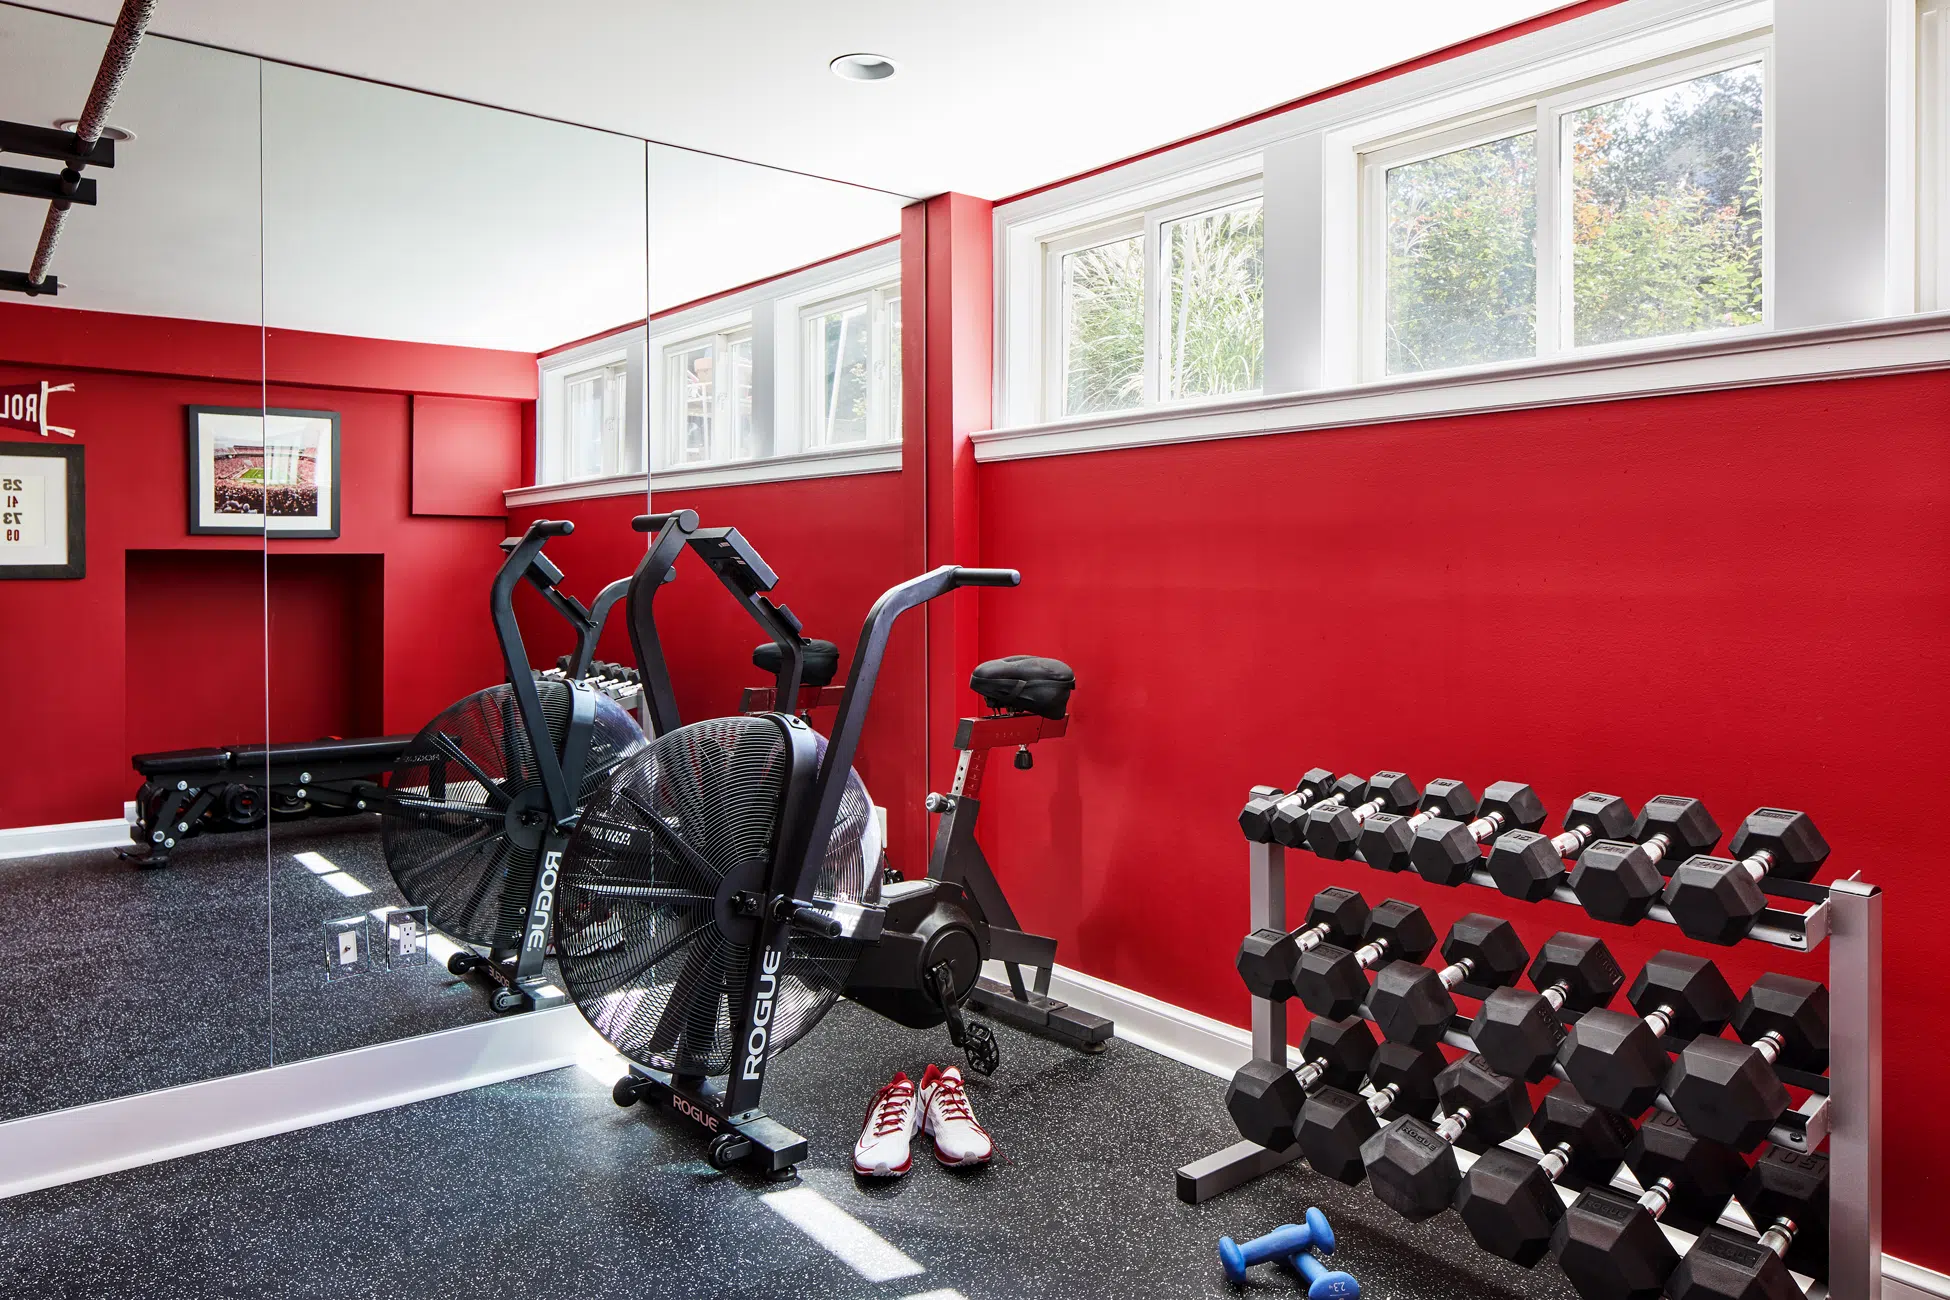 InSite Builders & Remodeling exercise room in a basement, photo by Stacy Zarin Goldberg